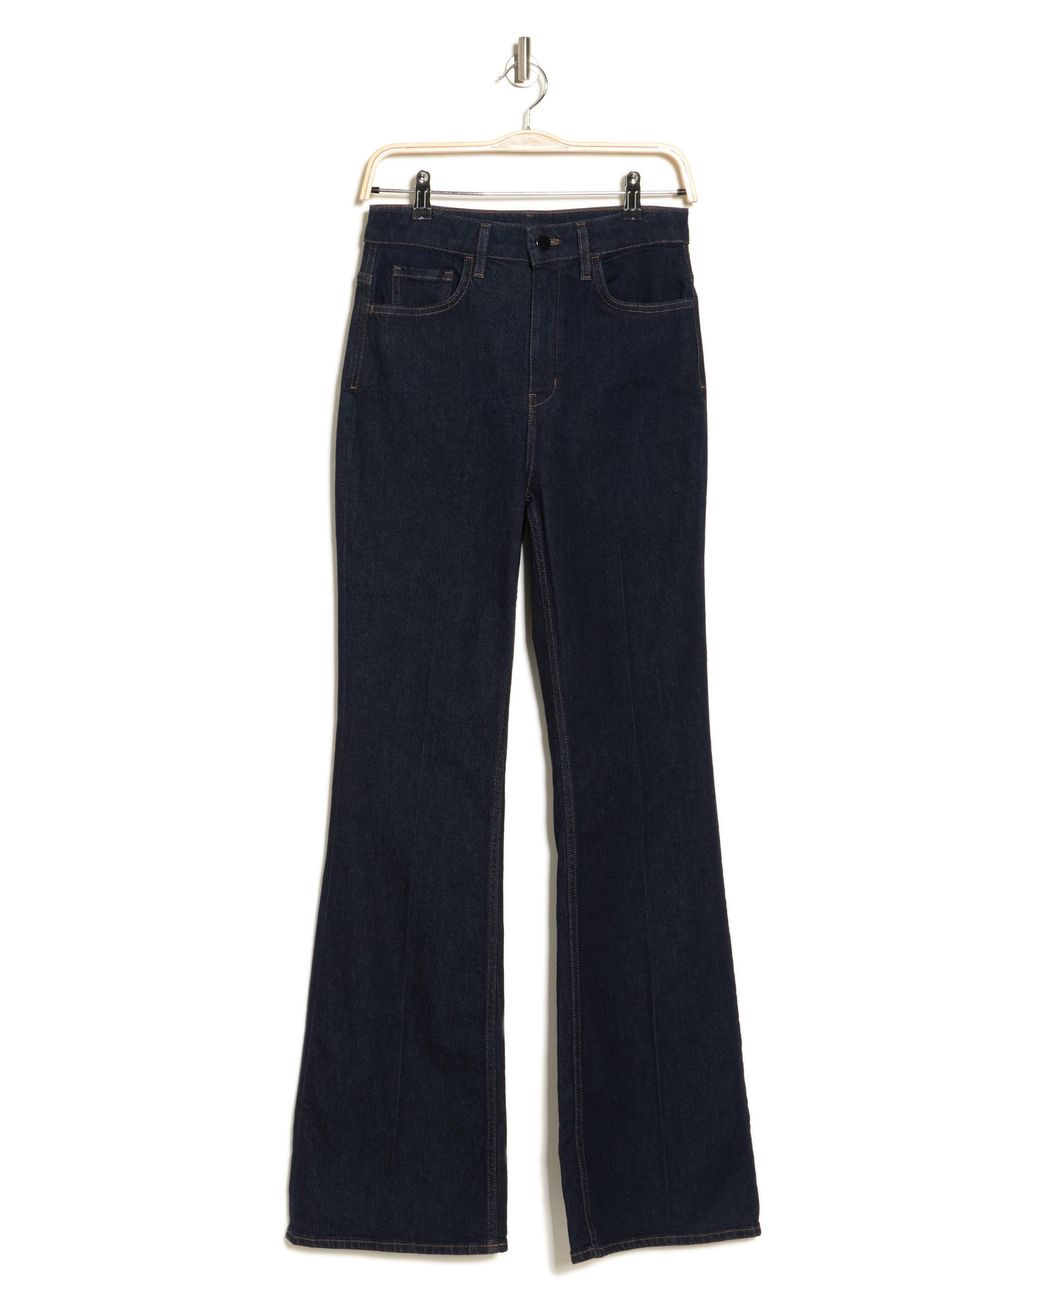 Theory Demitria High Waist Pants in Blue